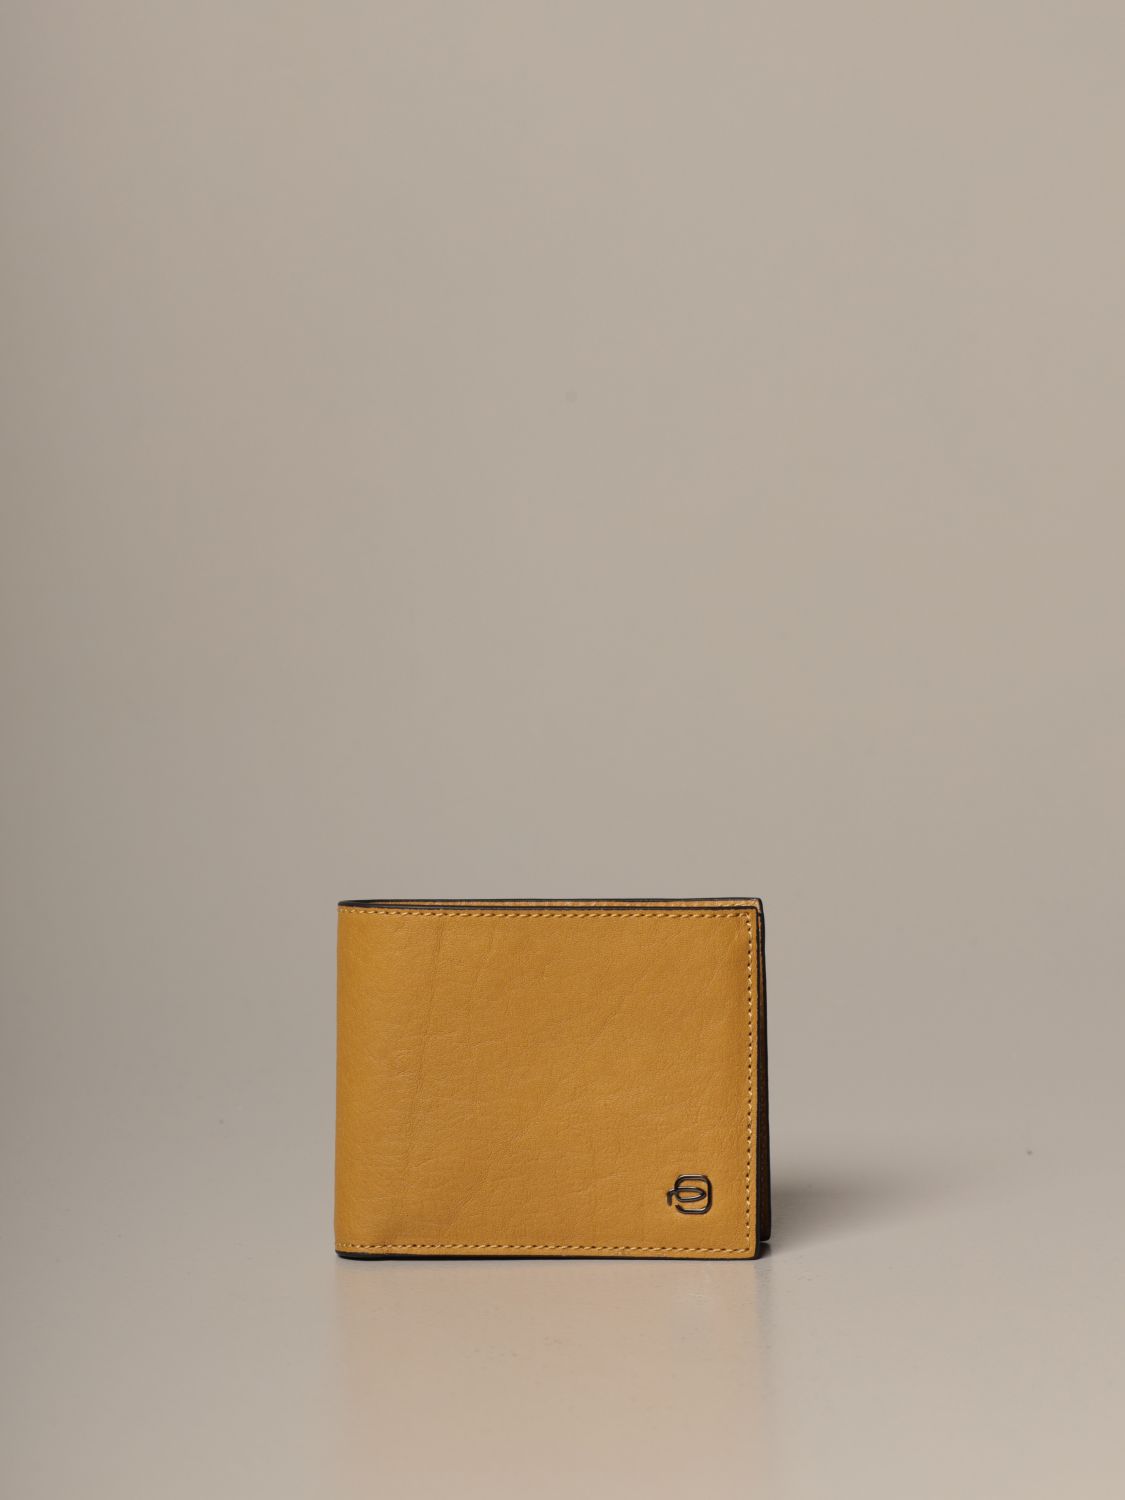 De stad hoofdonderwijzer rechtop Piquadro Outlet: wallet with leather coin holder - Yellow | Piquadro wallet  PU4823B3R online on GIGLIO.COM